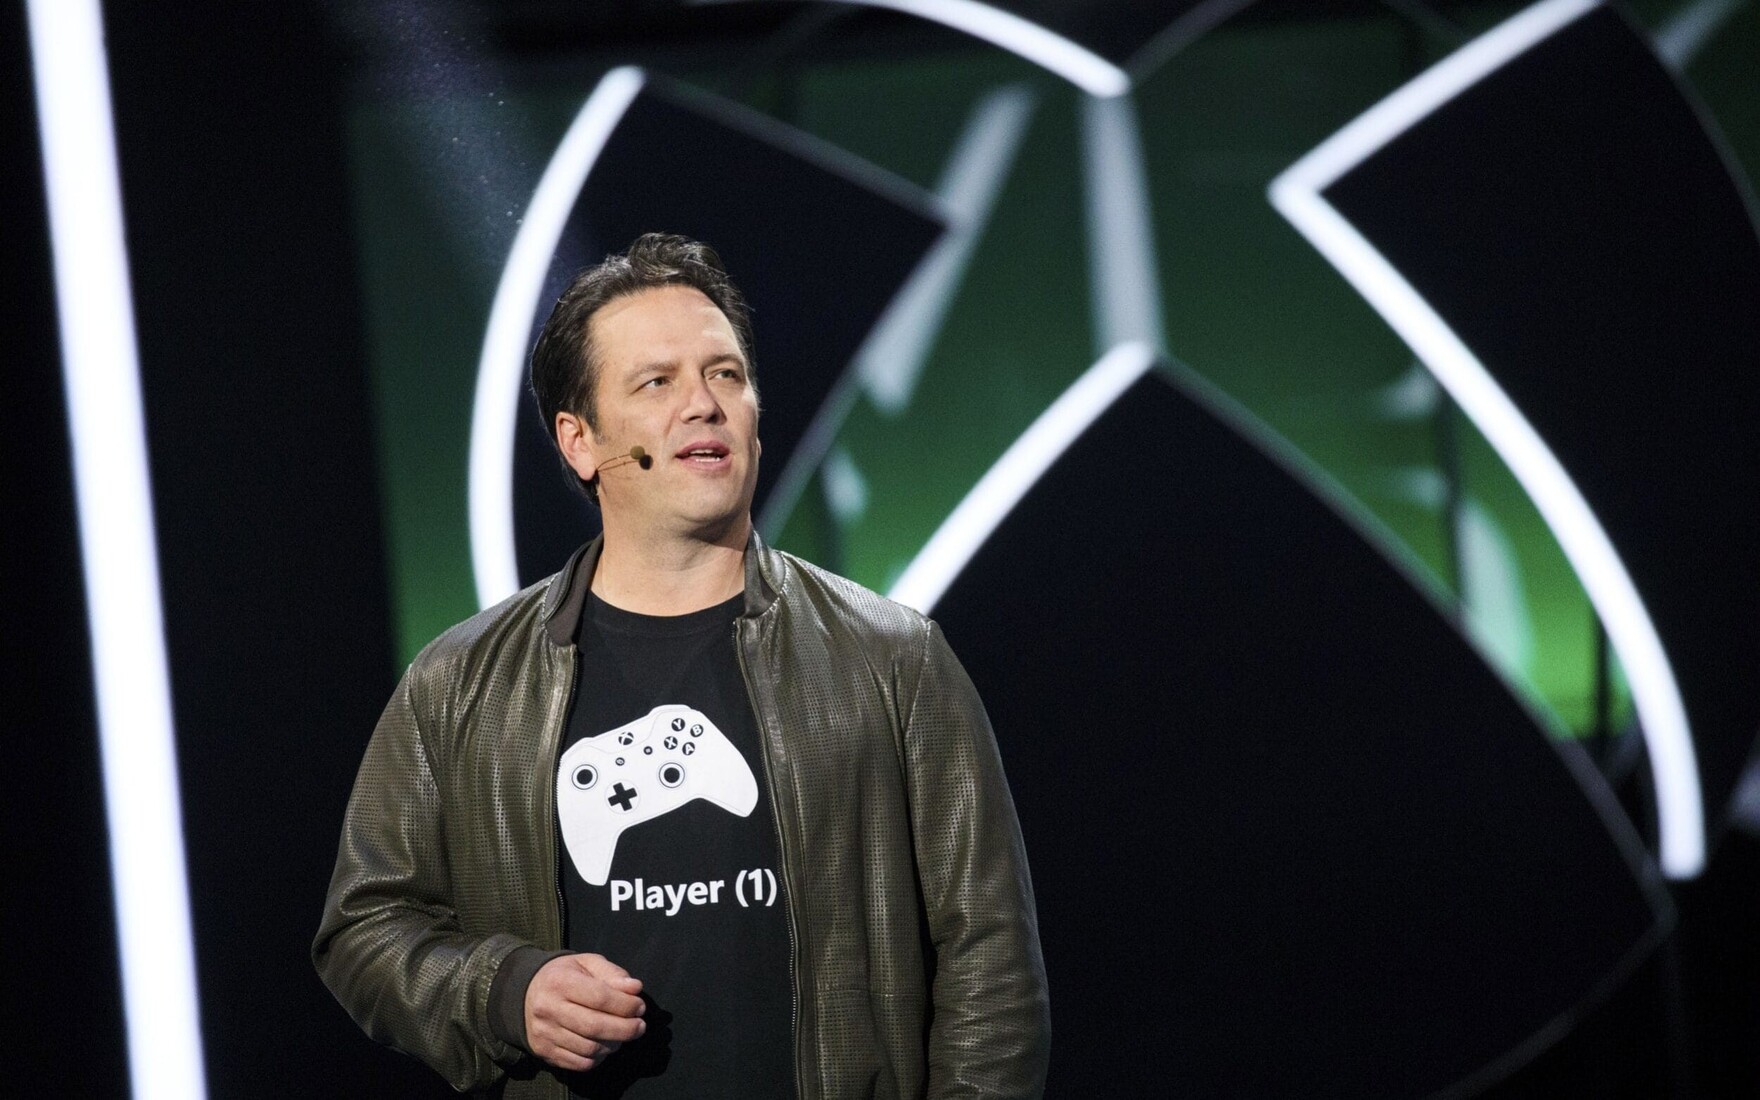 Starfield 'A Tremendous Hit' And One Of Xbox's Top 10 Most-Played Games,  Says Phil Spencer